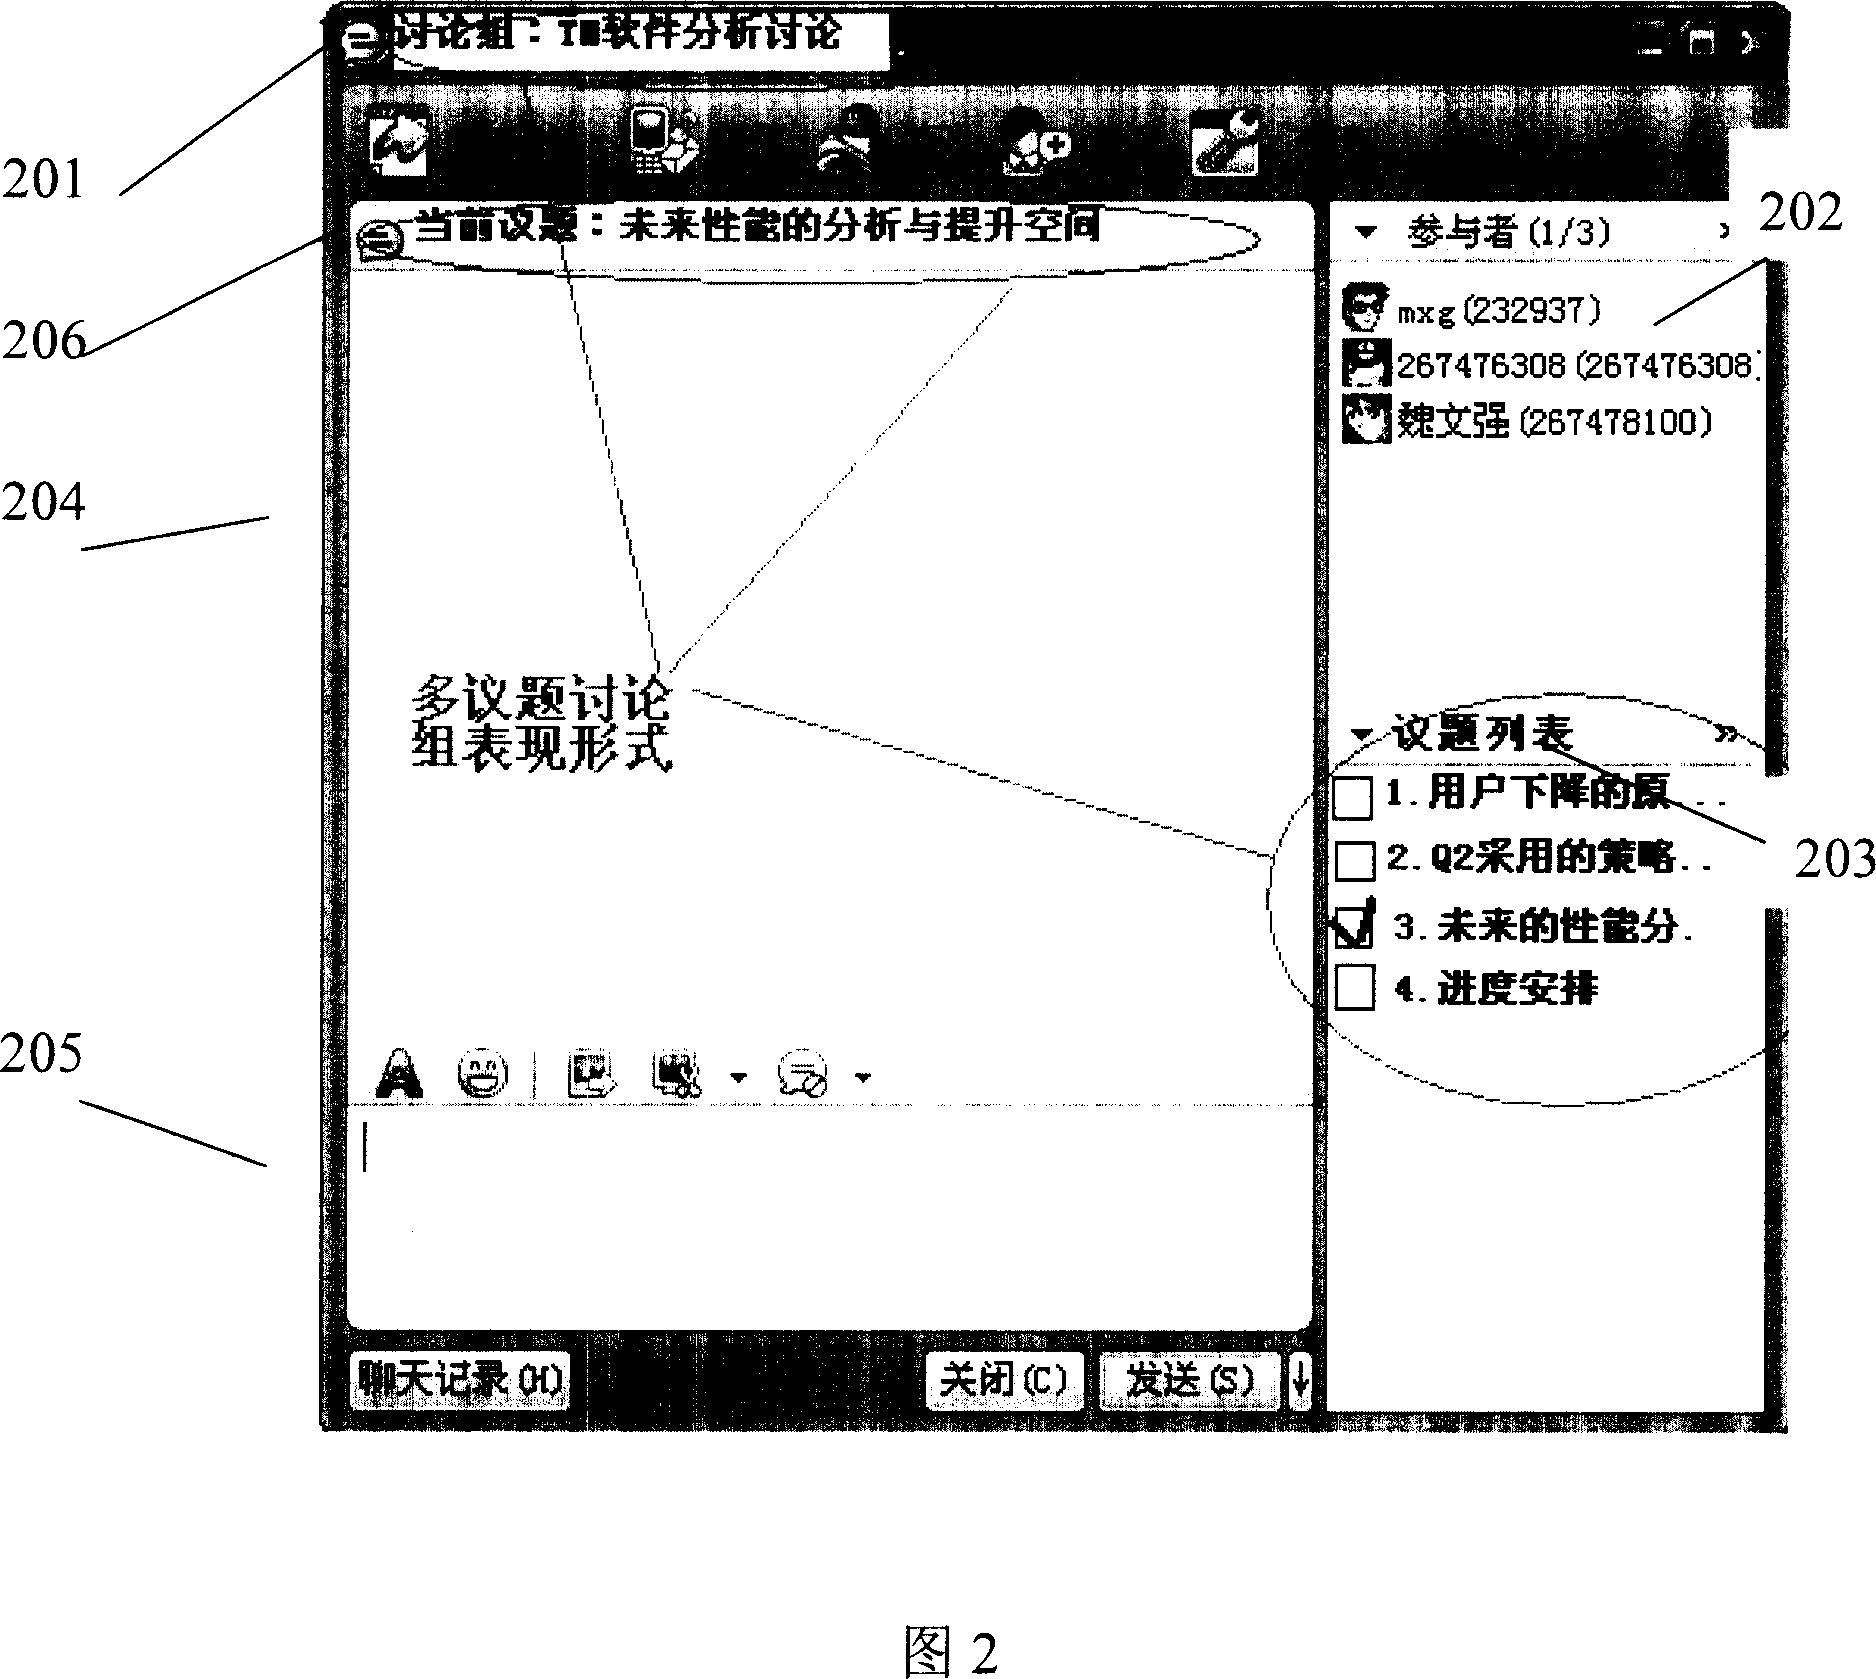 Method for processing muti-topic discussion group information flow based on instant communication